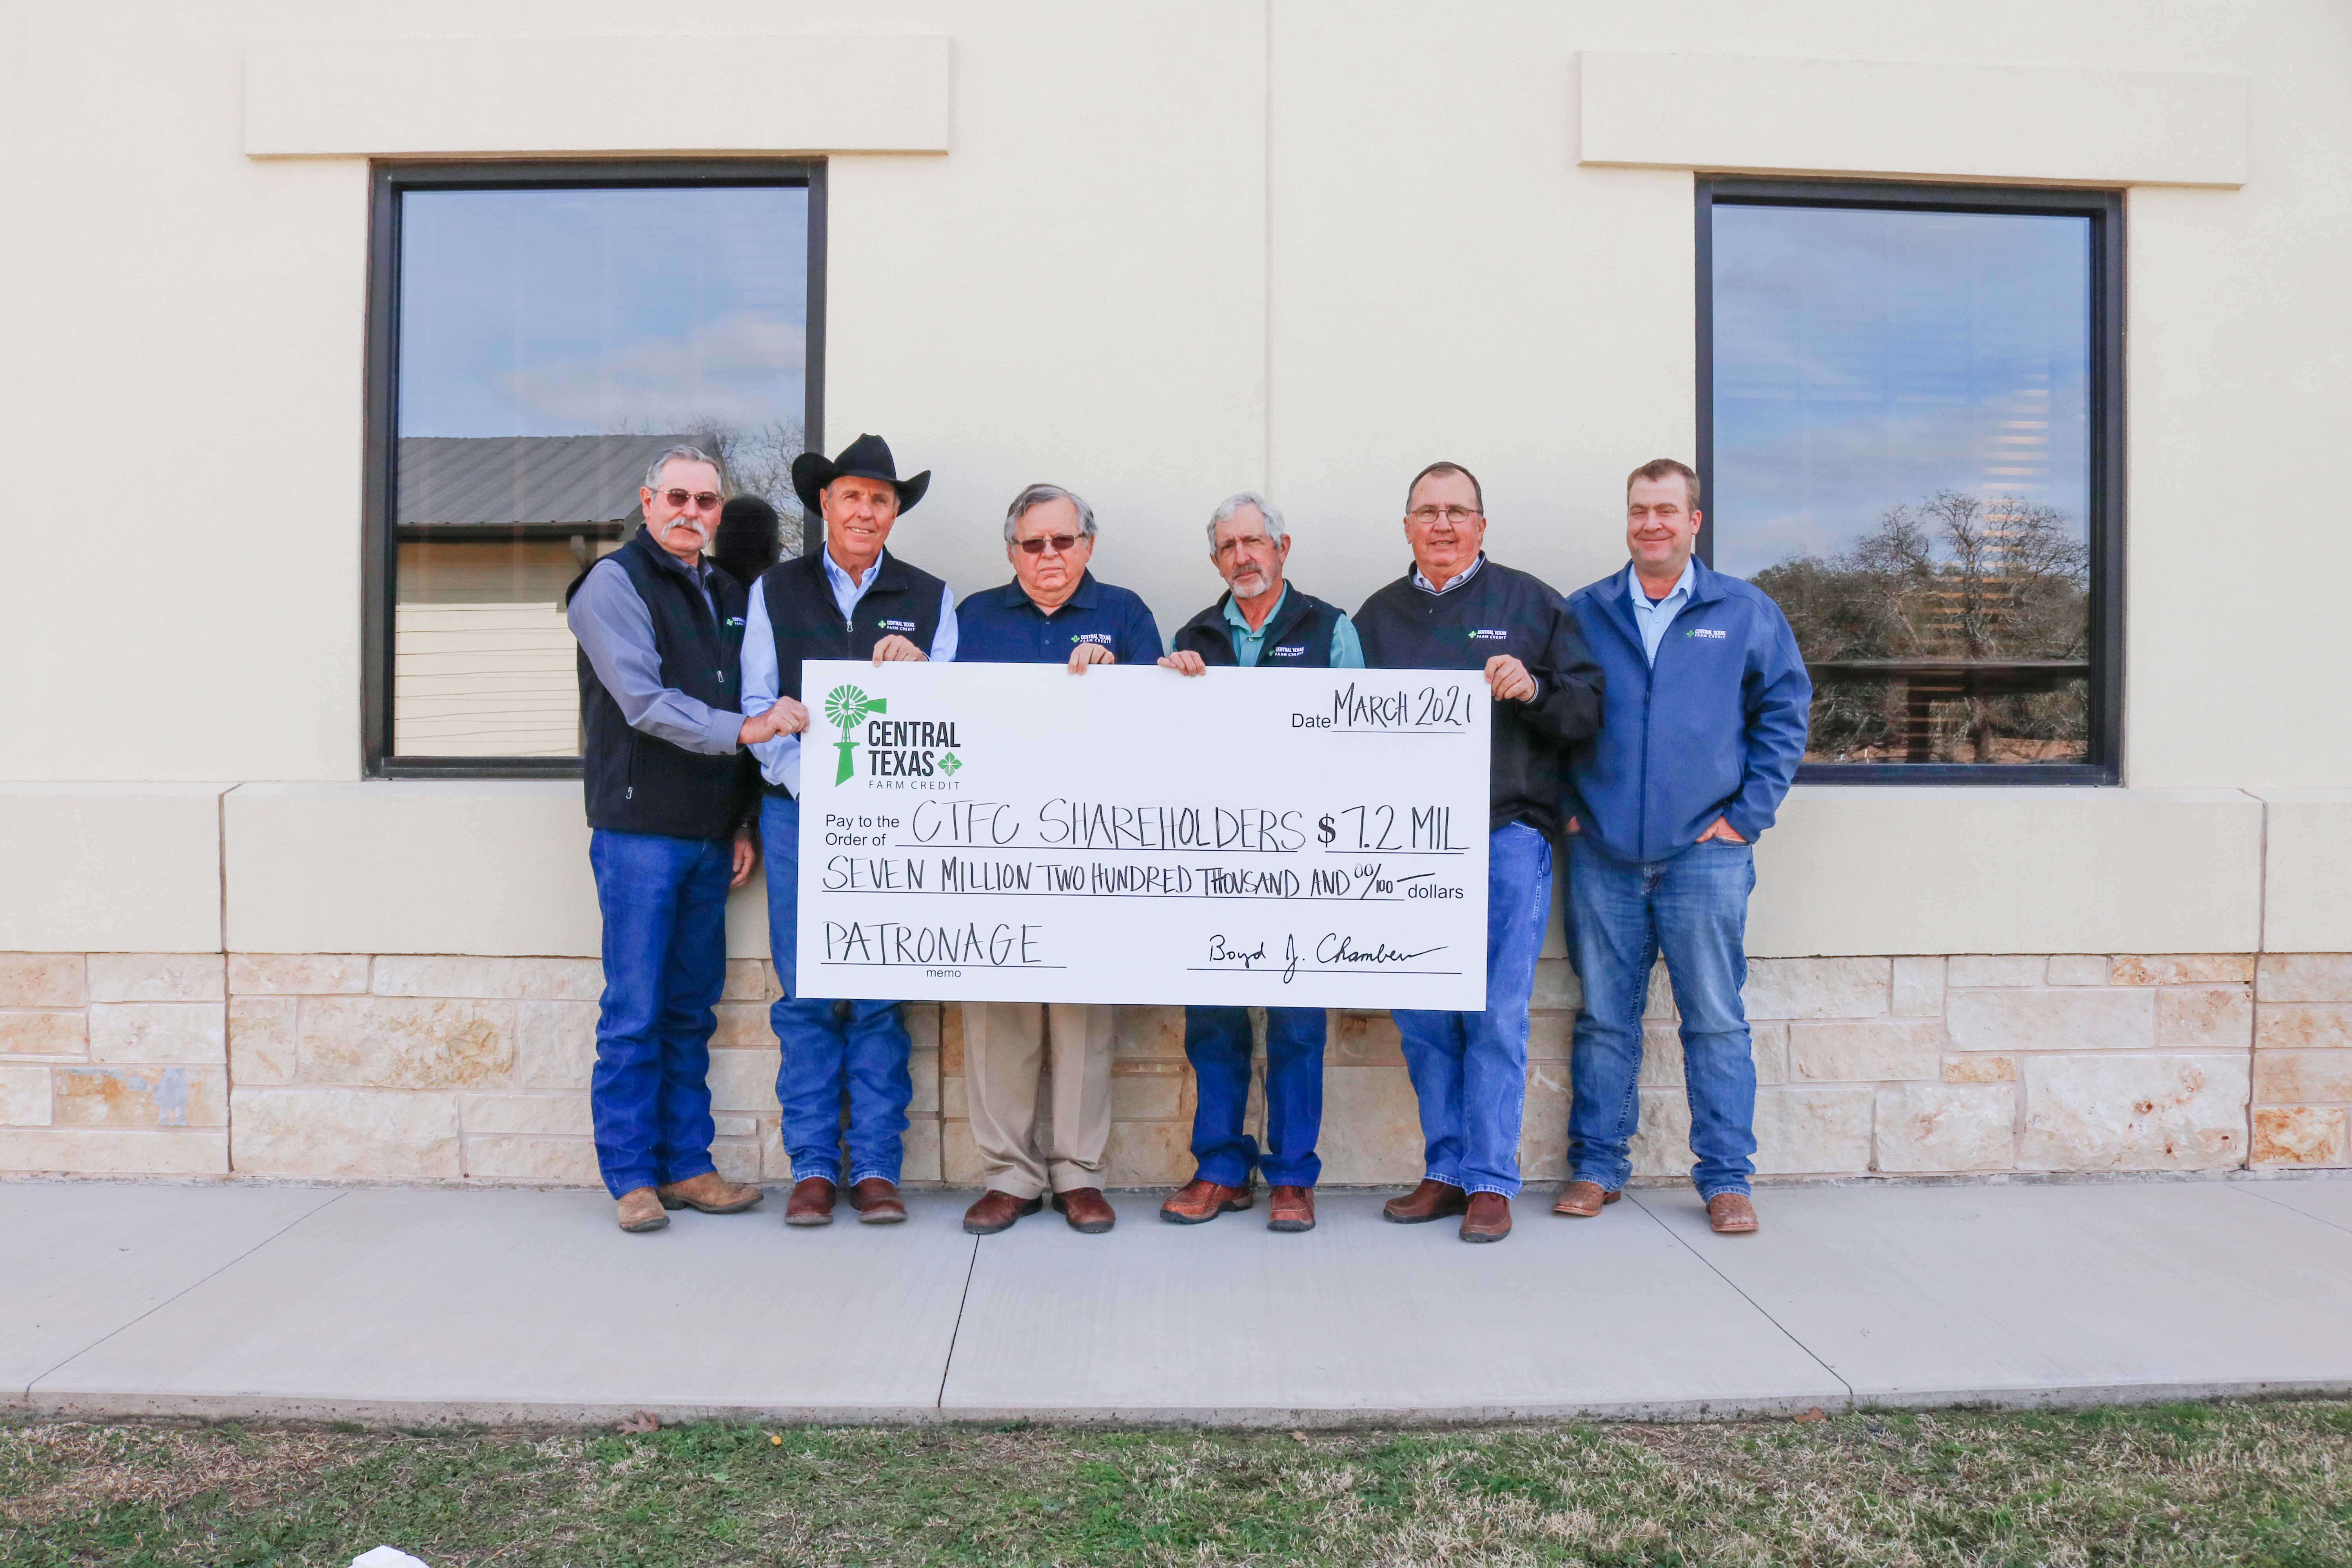 Central Texas Farm Credit's board of directors, from left to right are Philip Hinds, member; Kenneth Harvick, vice chairman; Burl Lowery, member; Mike Finlay, member; Steven Lehrmann, member; and Robby Halfmann, chairman.